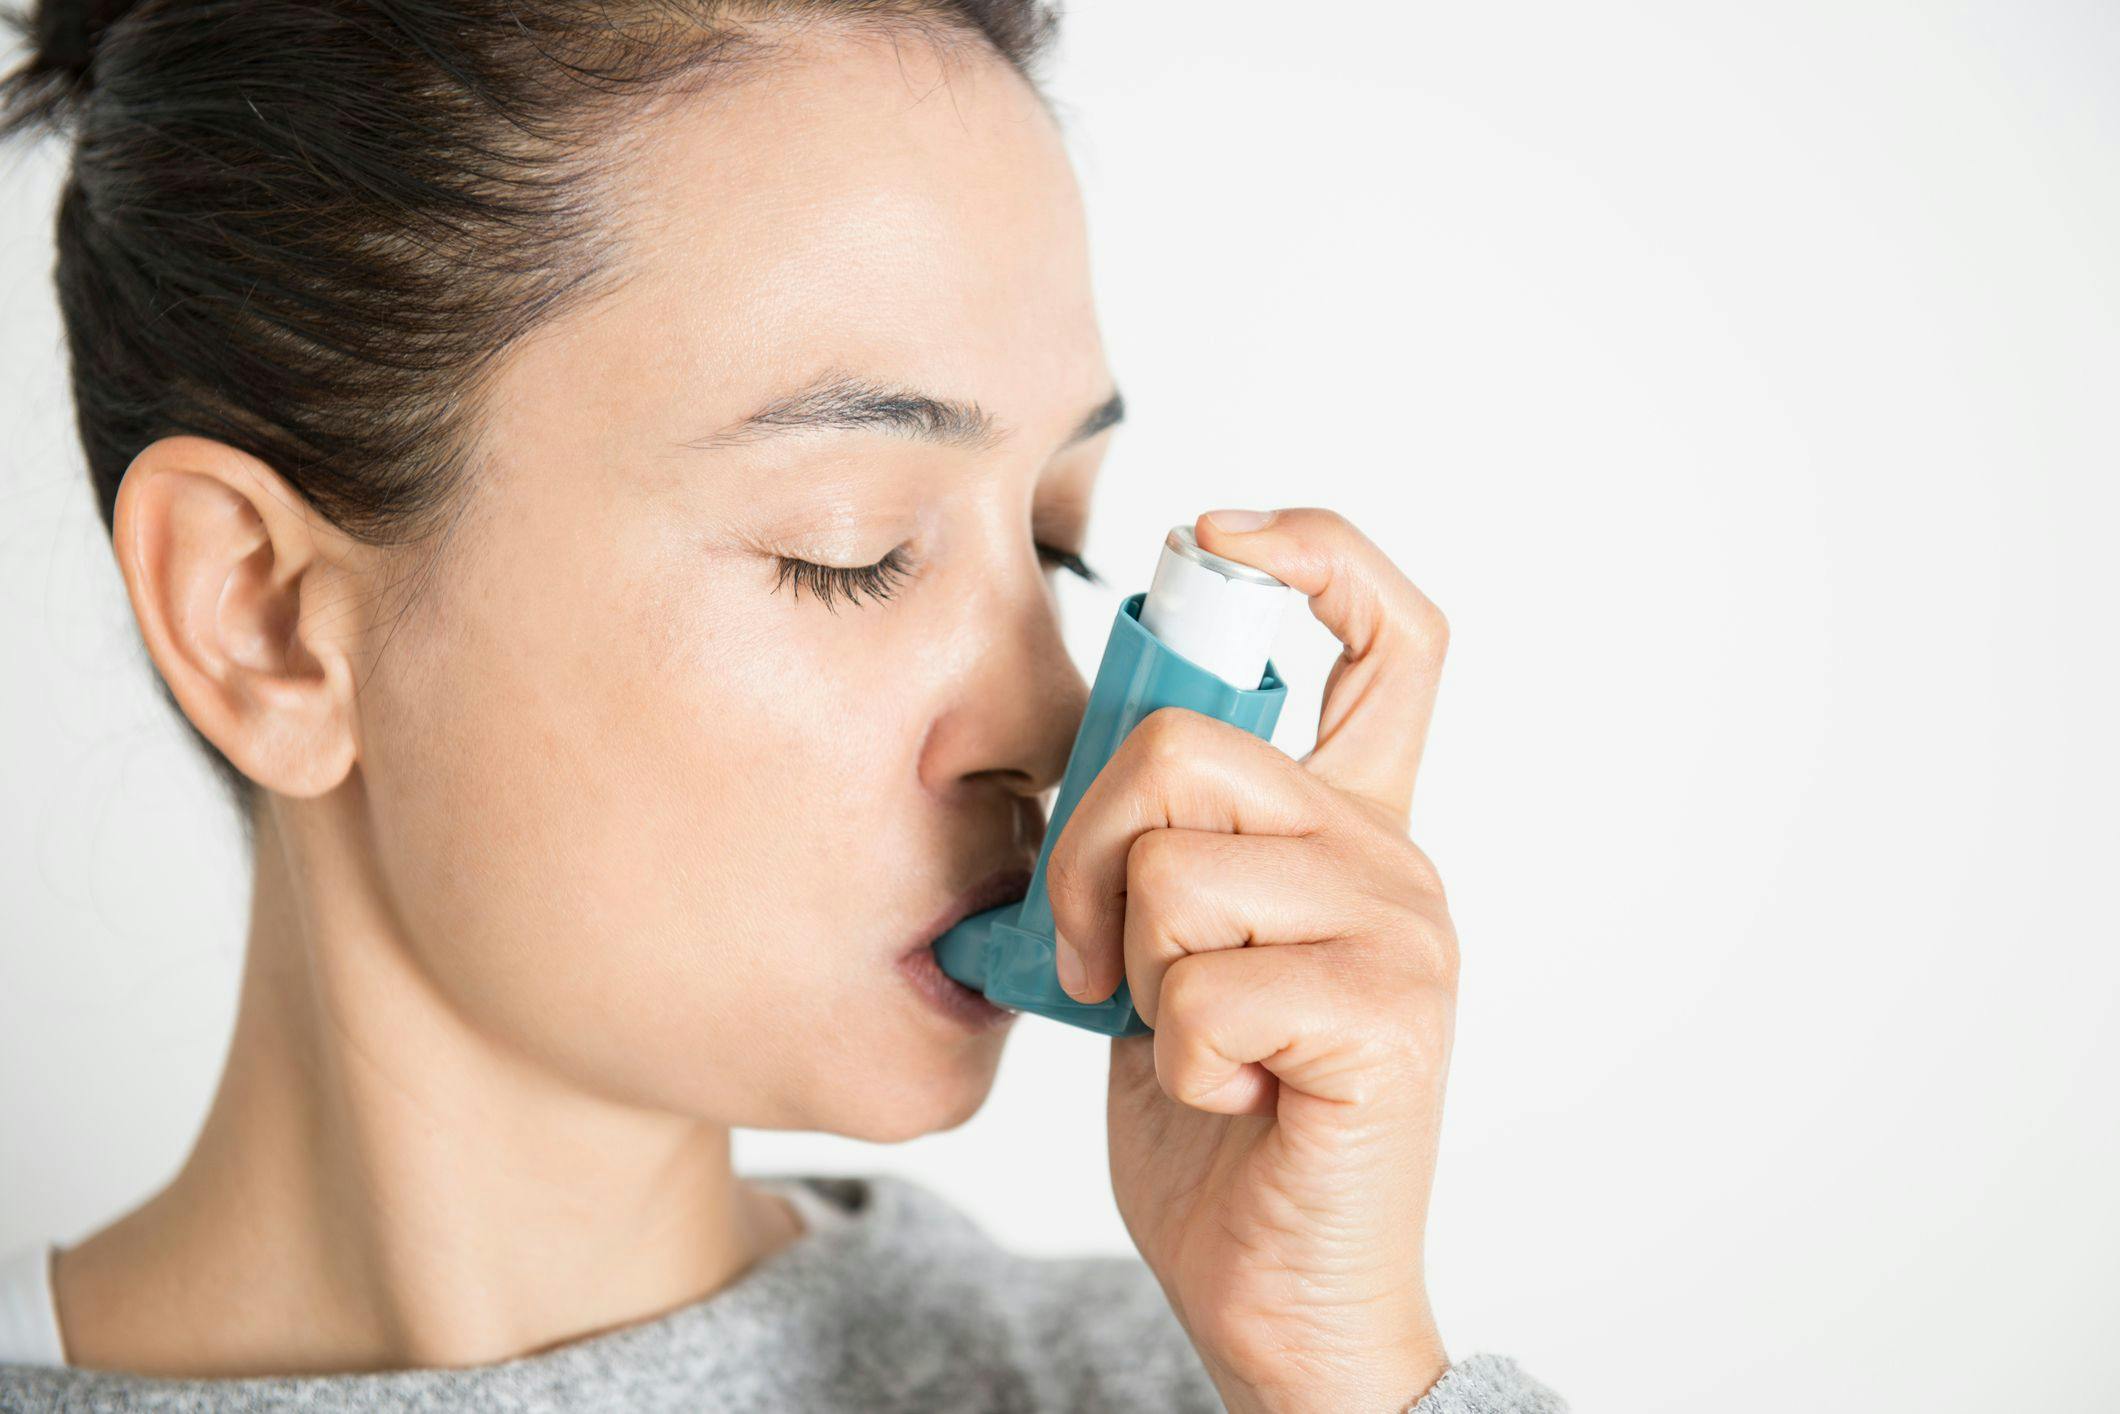 Tezepelumab Data Continue to Show Promise for a Broad Population of Severe Asthma Patients